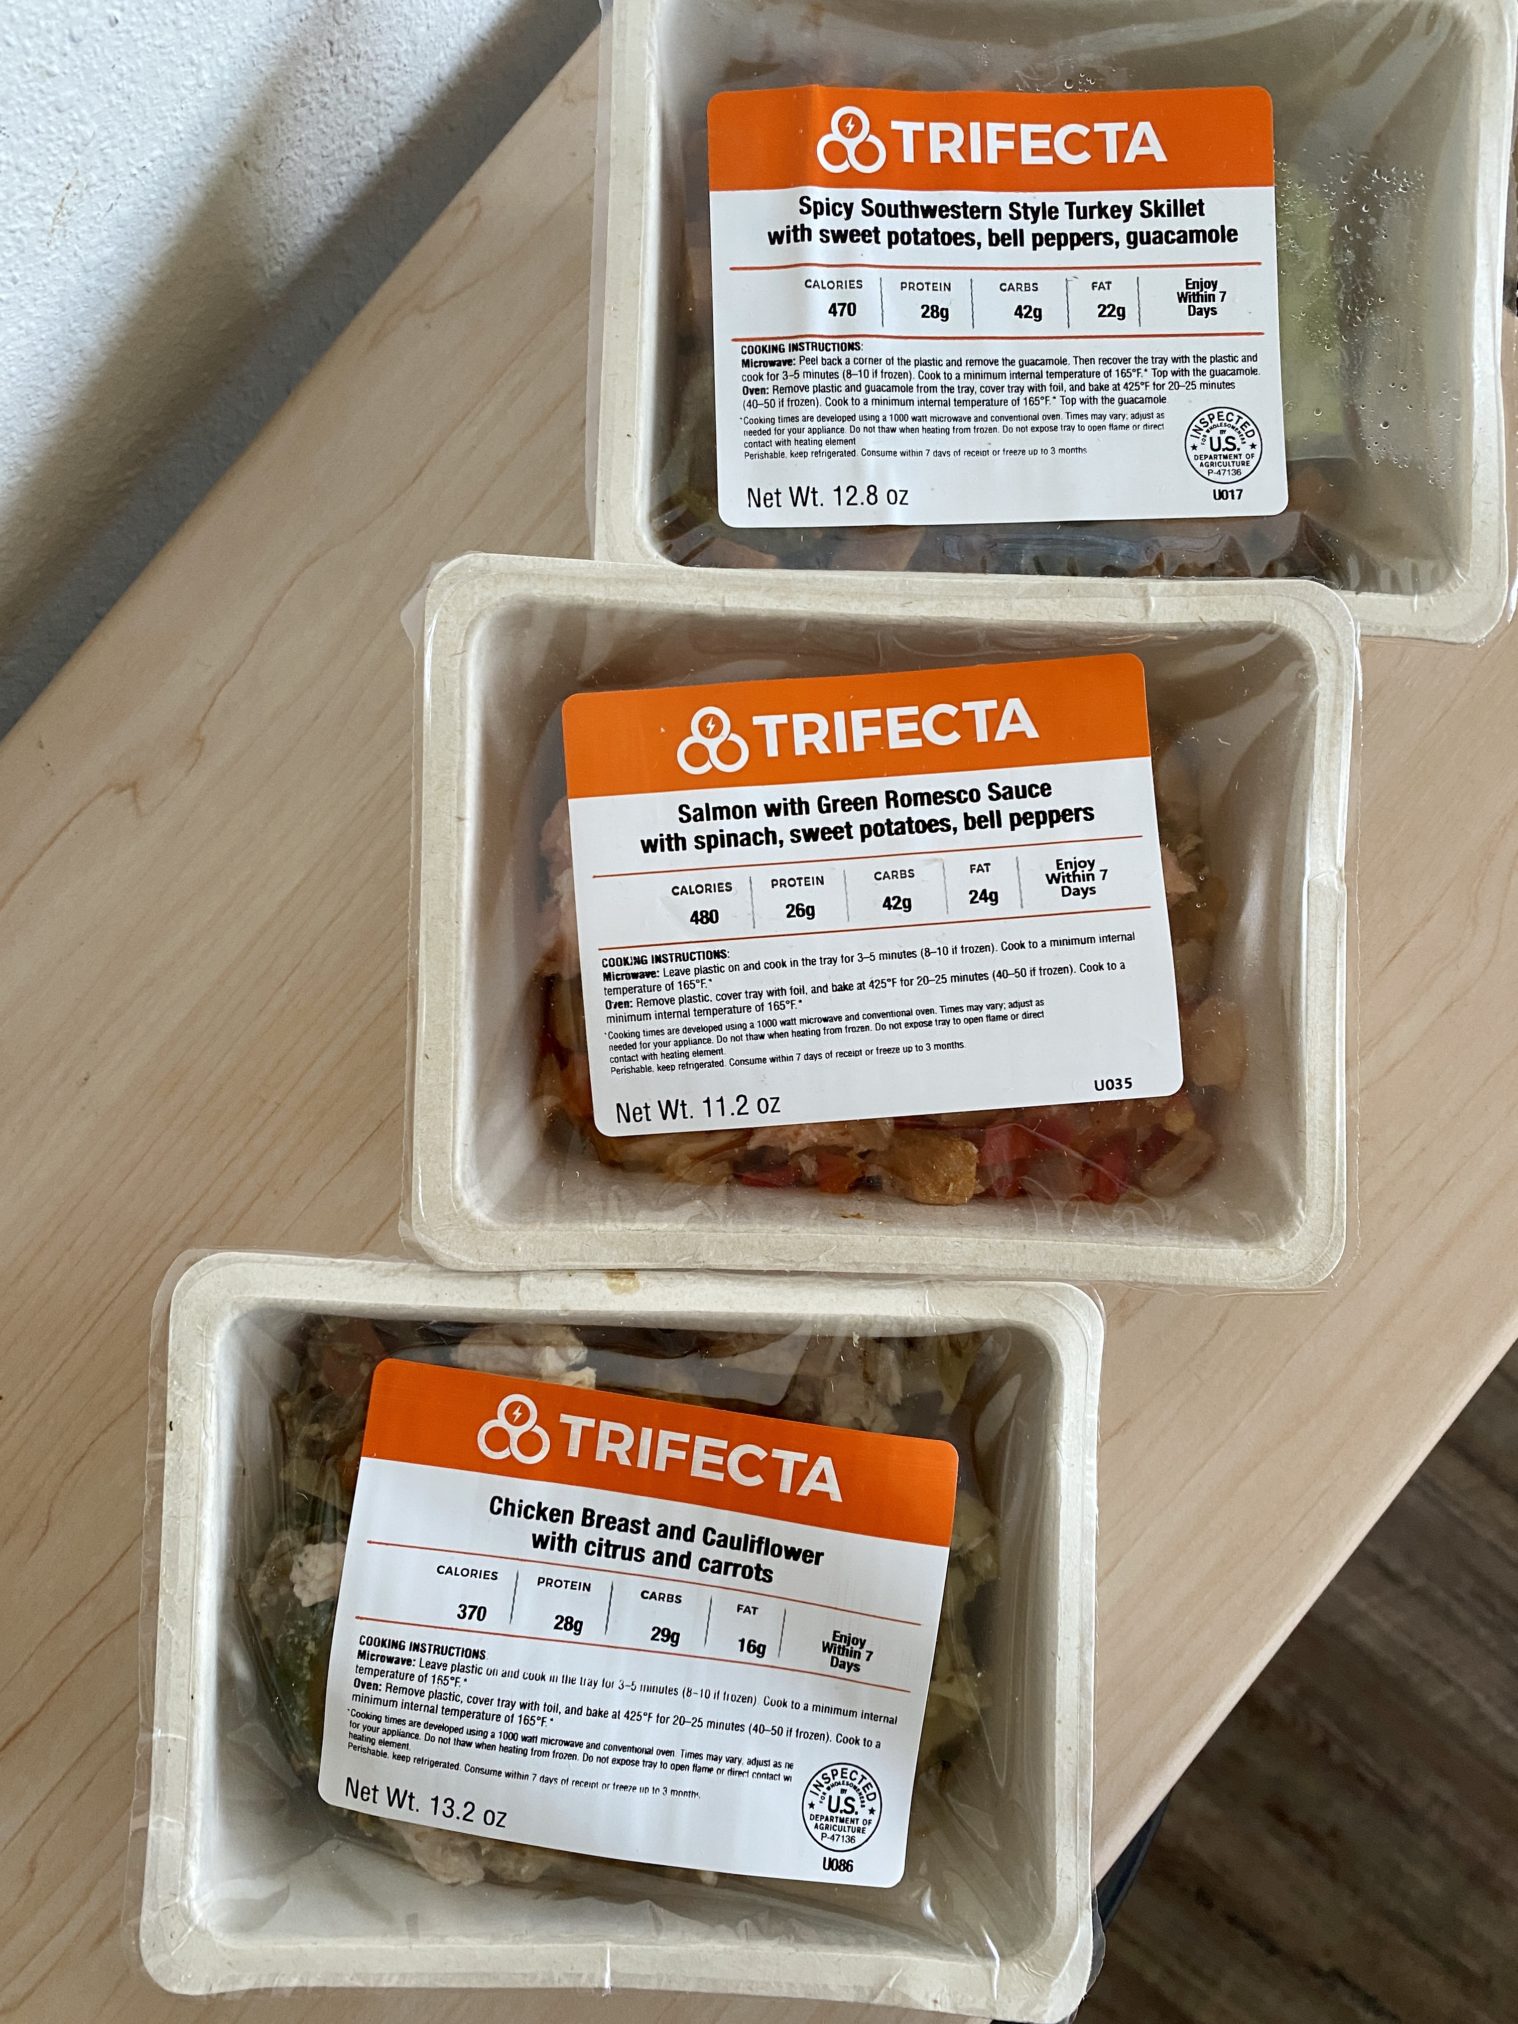 Trifecta Meal Subscription: Do The Meals Taste Good?